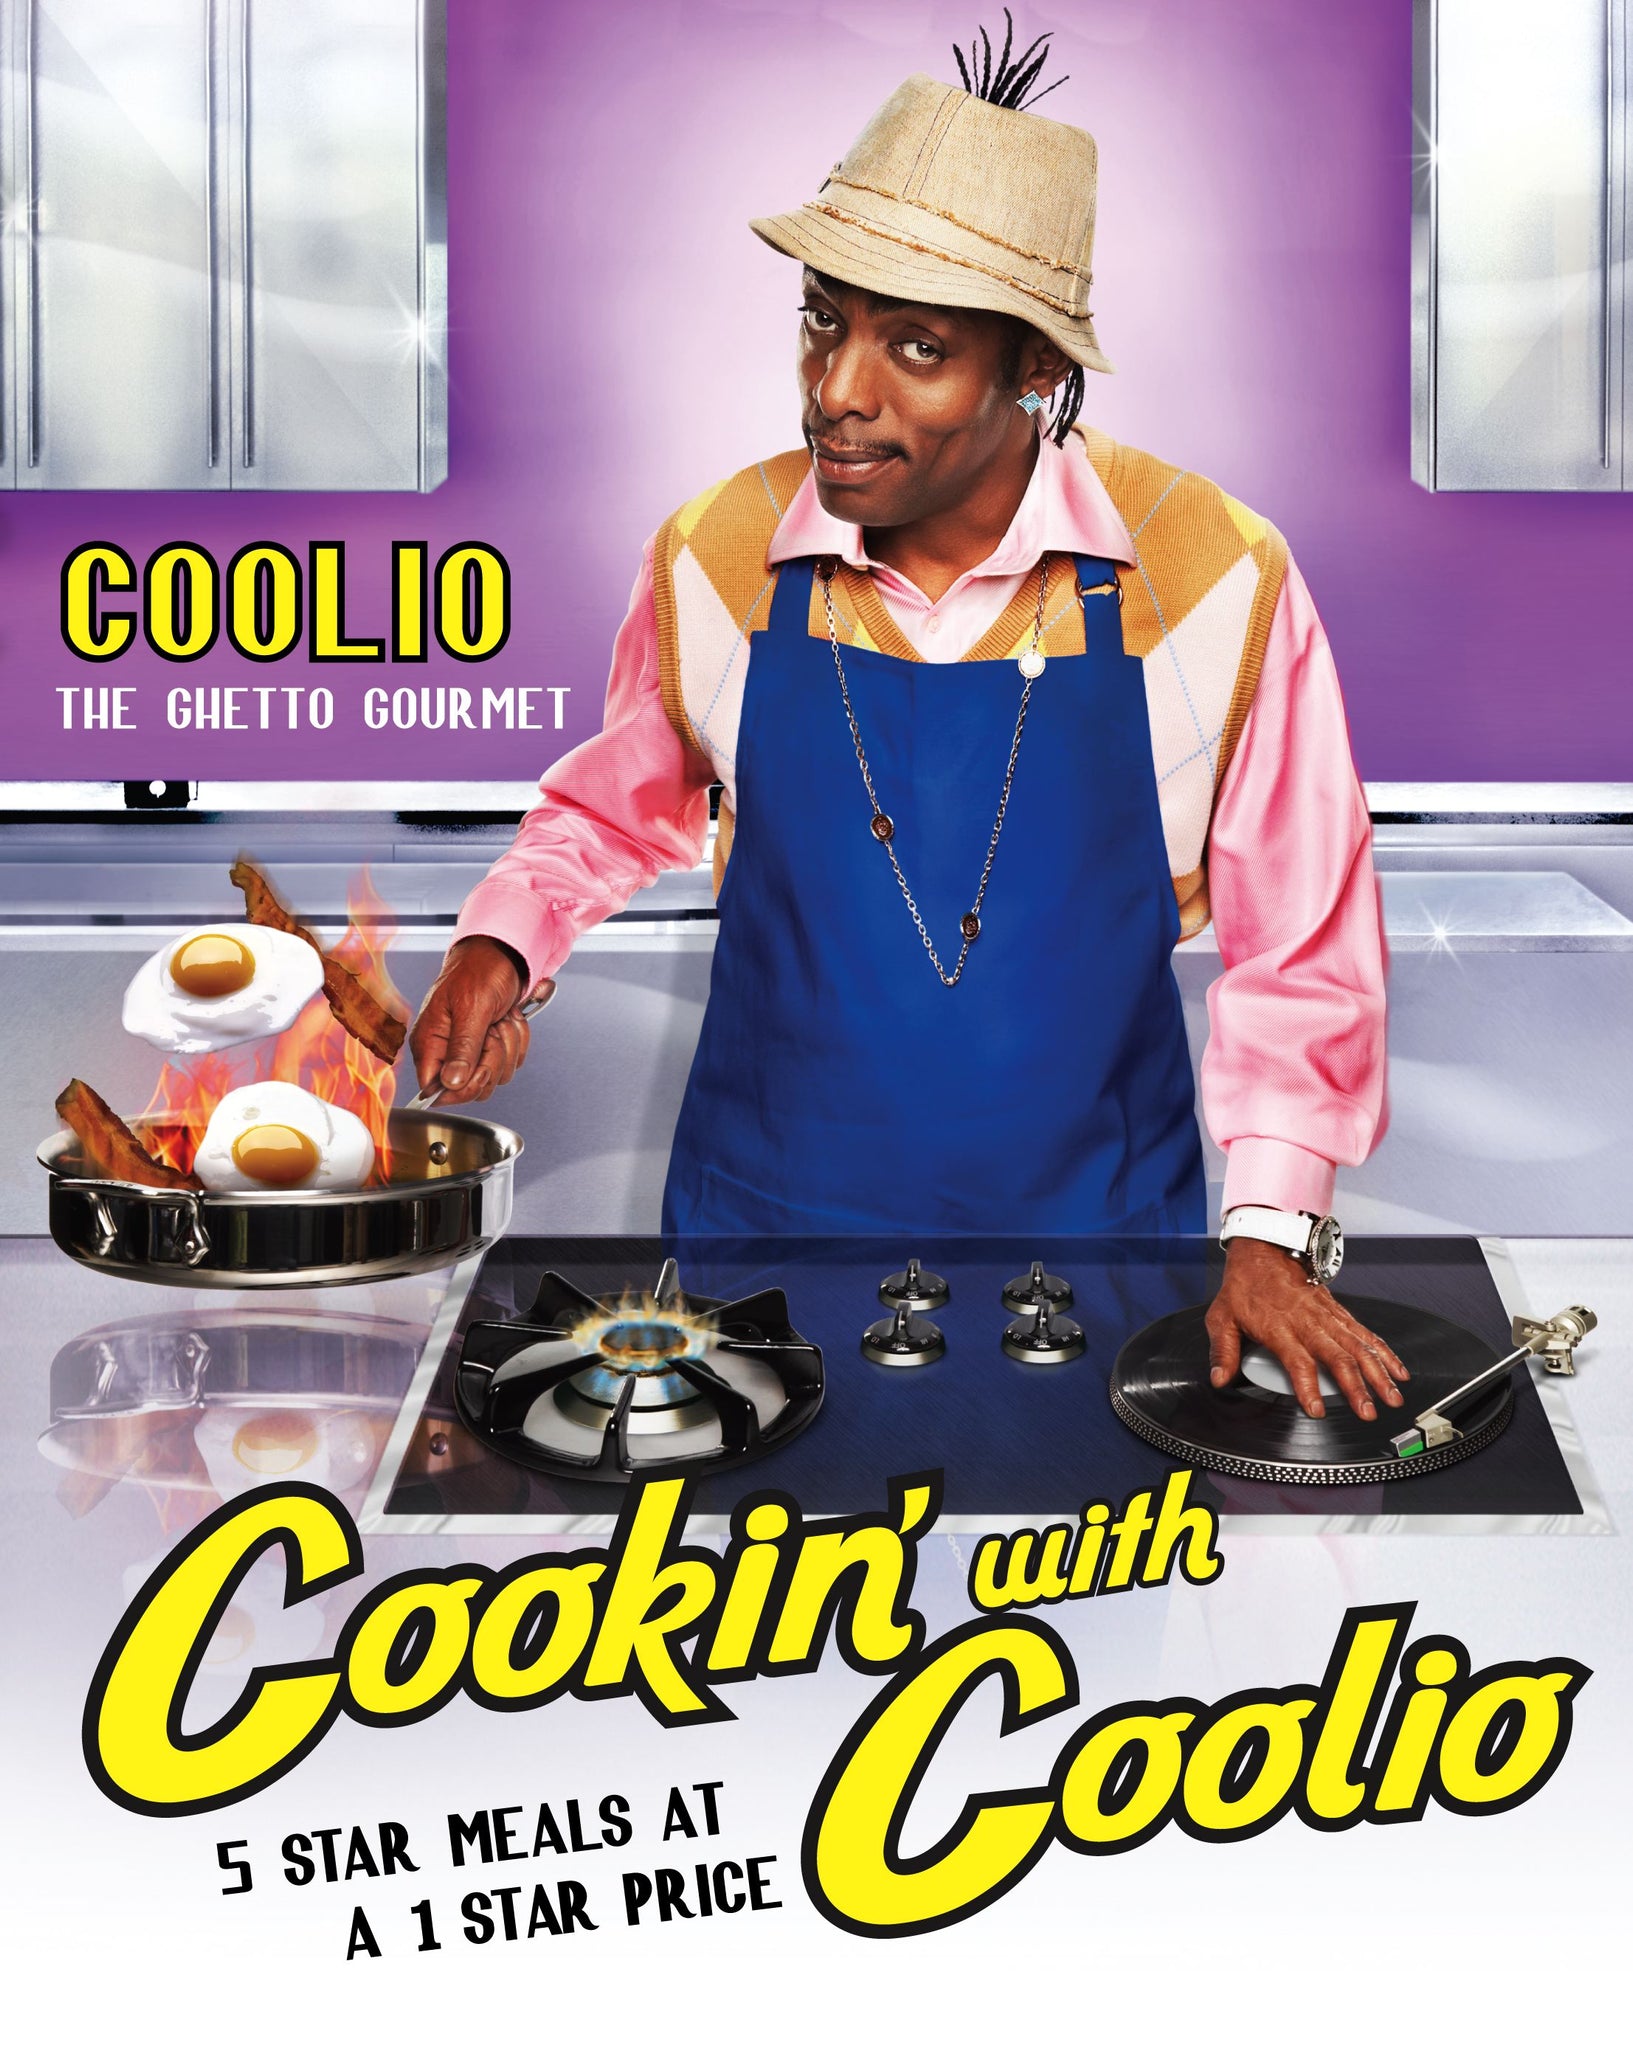 Cookin' with Coolio : 5 Star Meals at a 1 Star Price